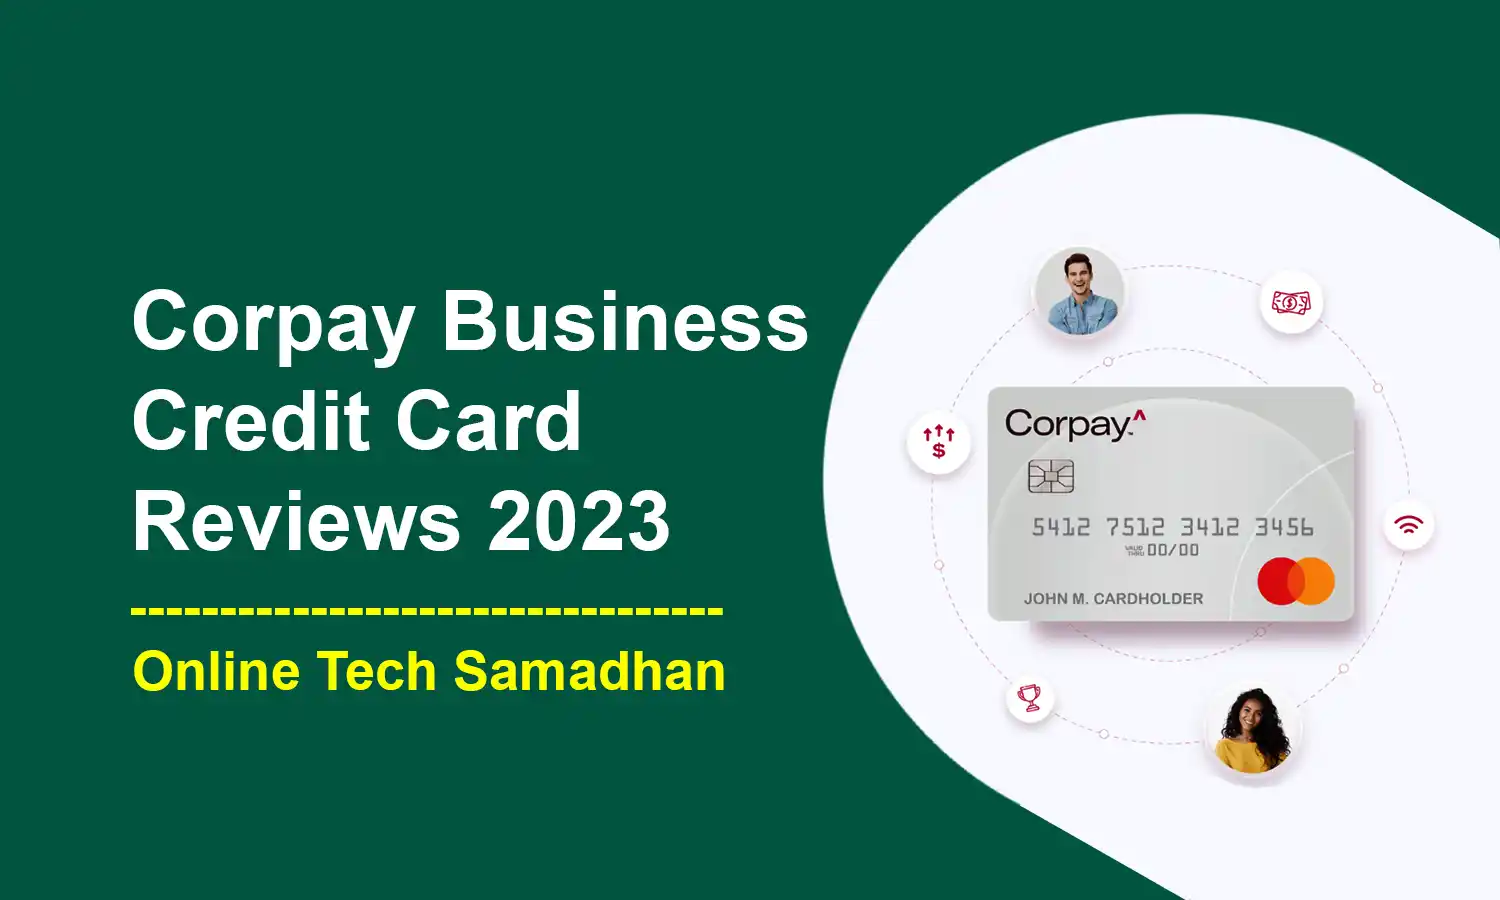 Corpay Business Credit Card Reviews